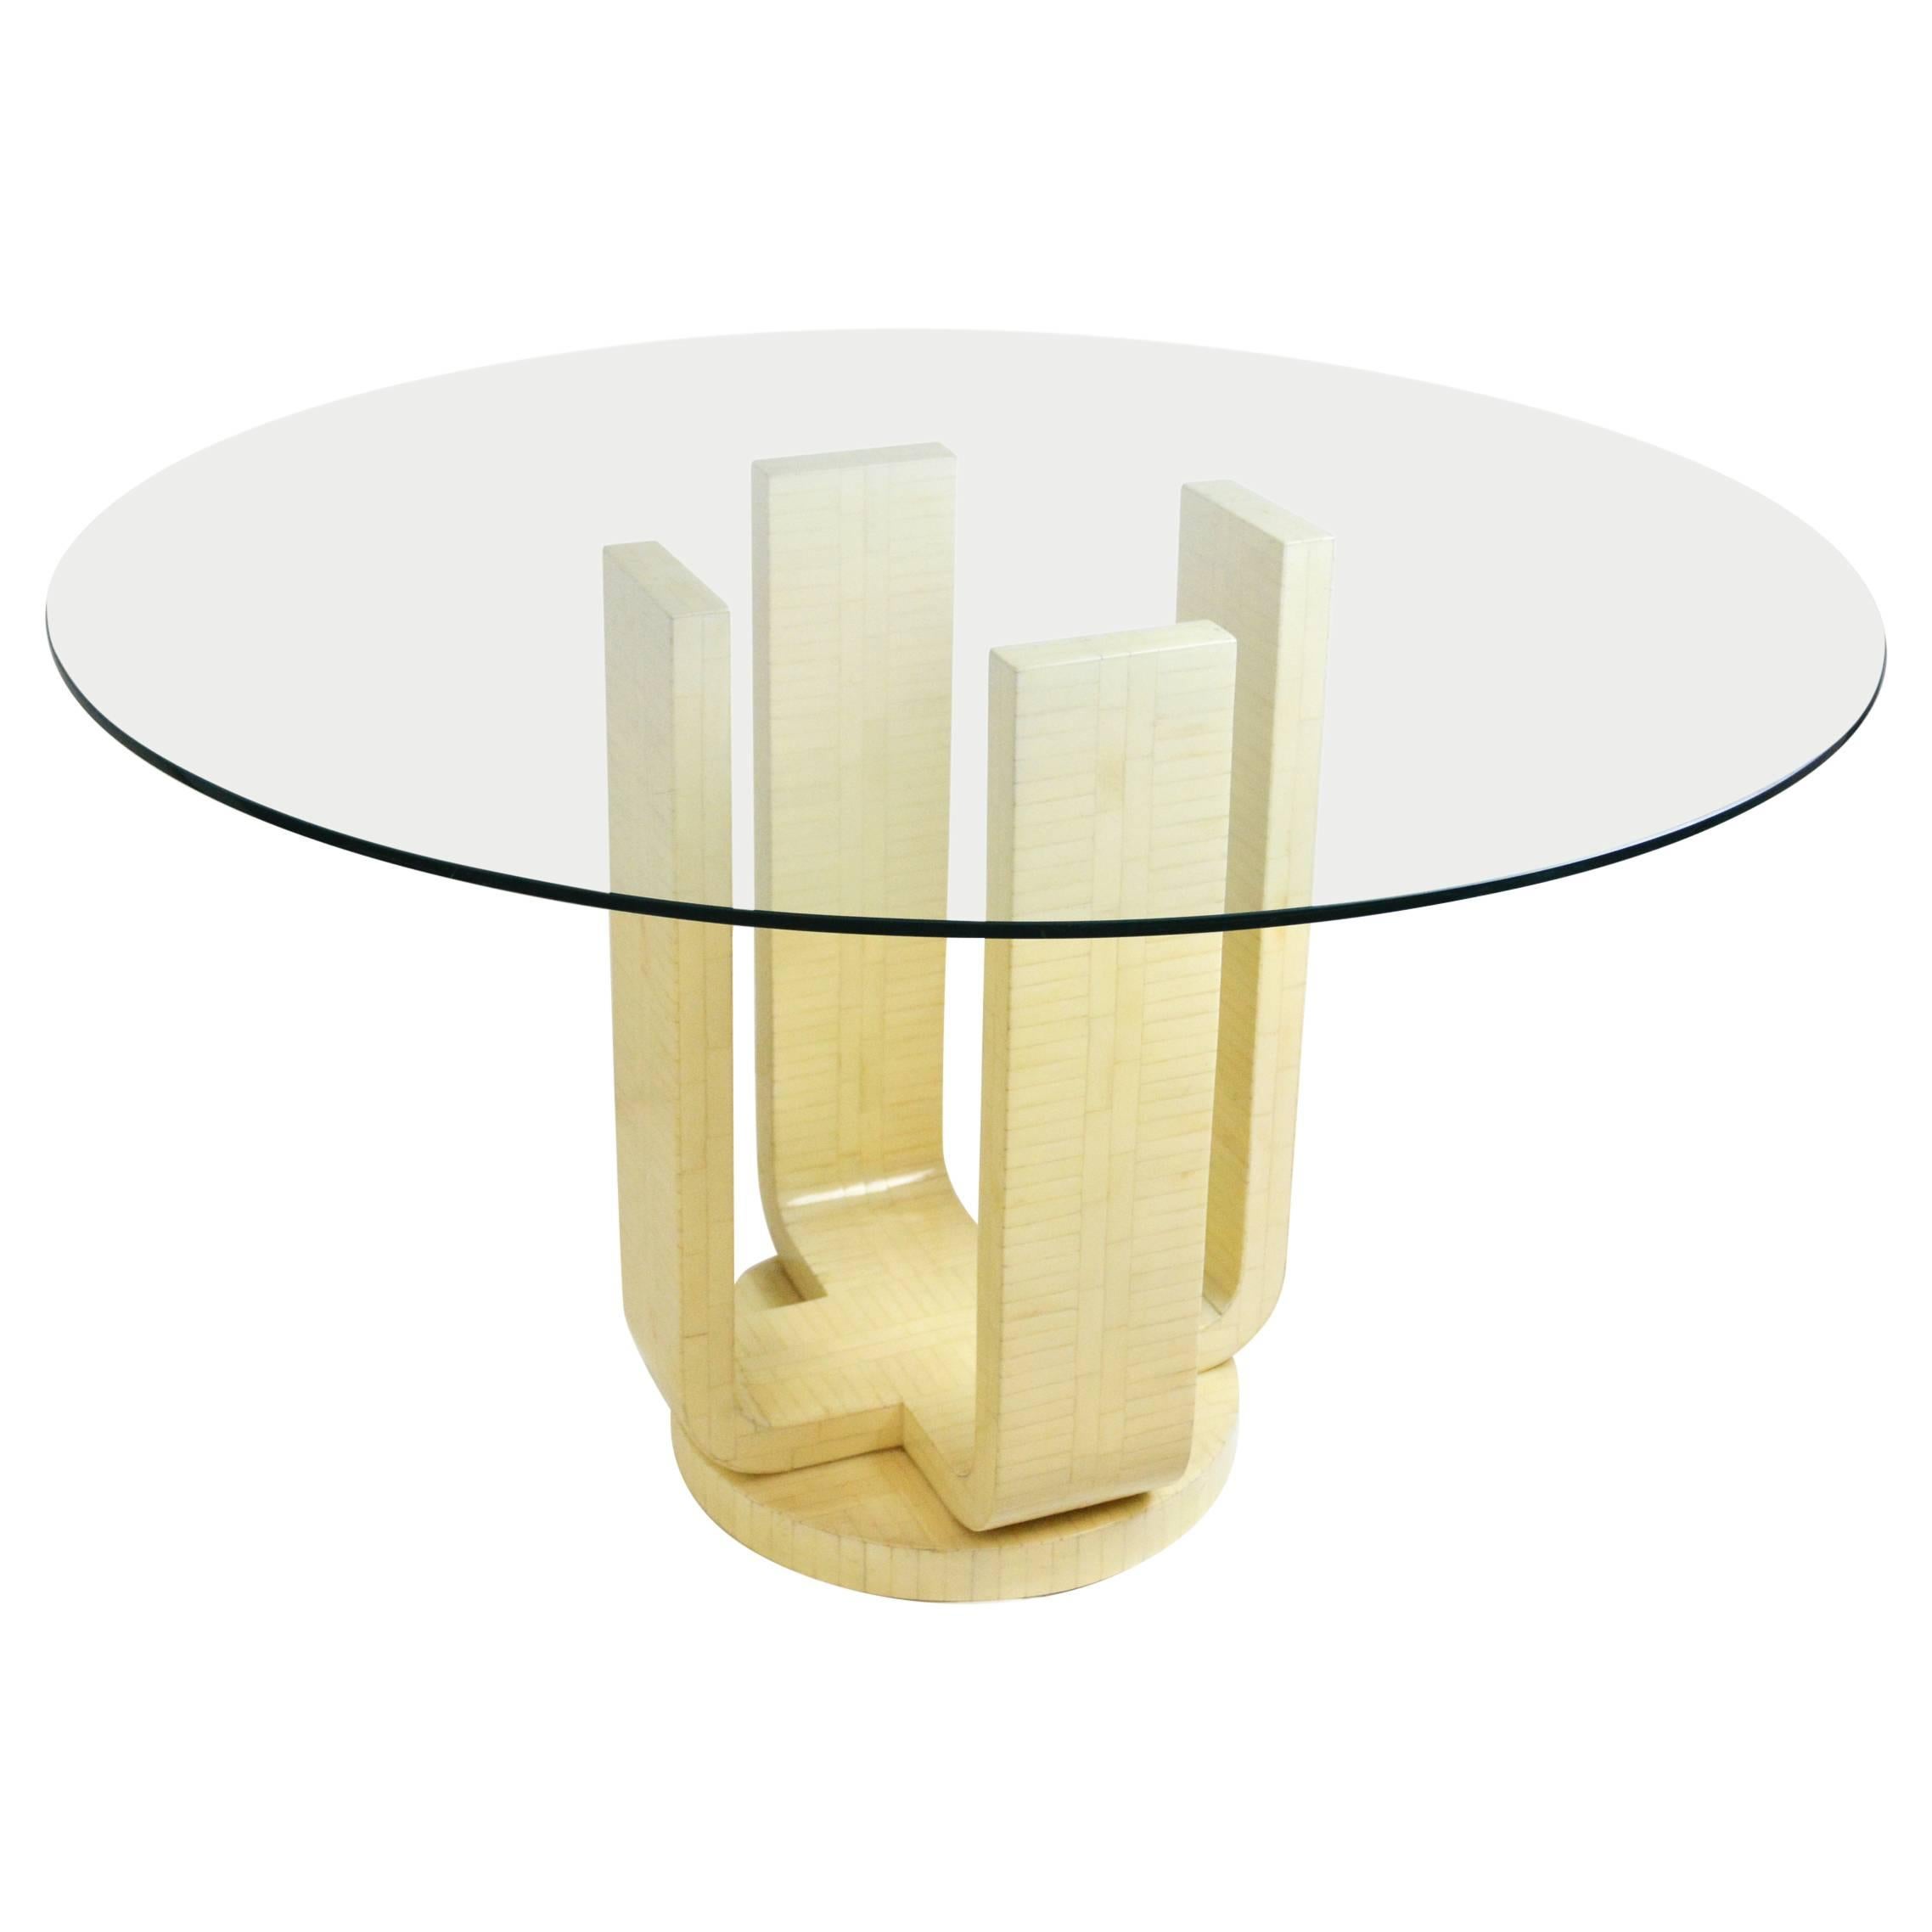 Karl Springer Style Tessellated Bone Dining Table with Glass Top